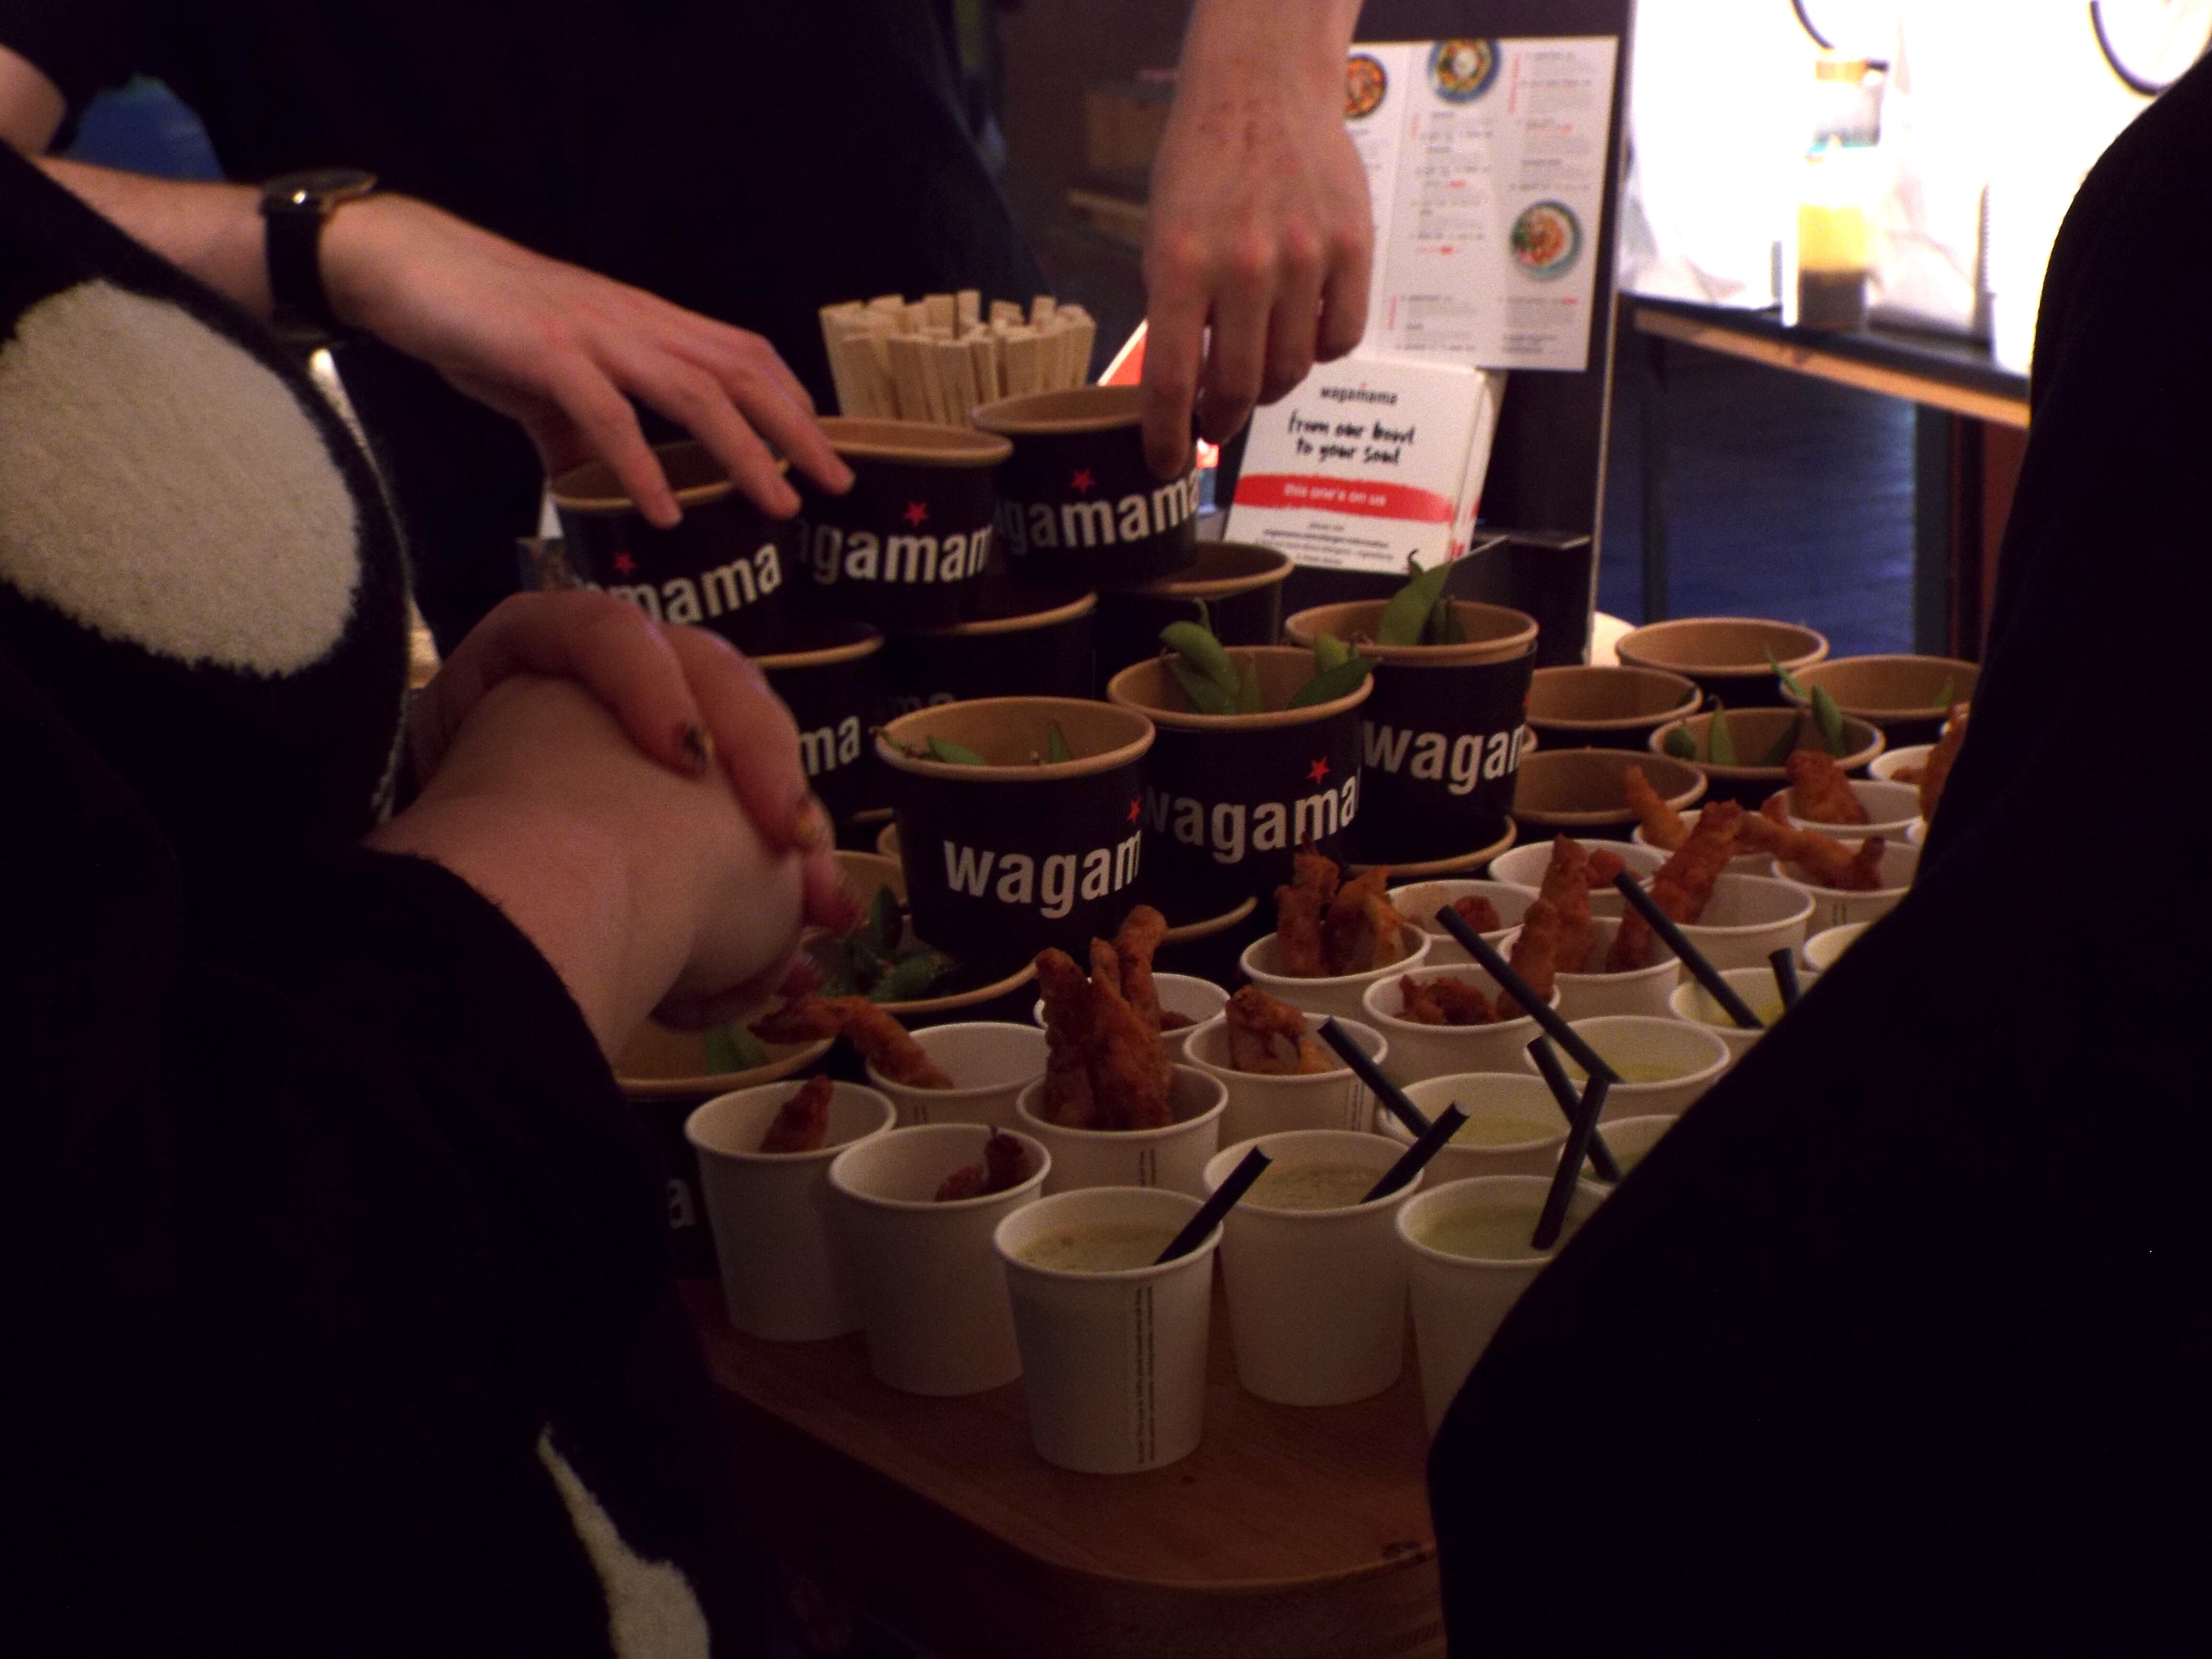 A spread of Wagamama treats in small Wagamama pots and little cups with black paper straws.